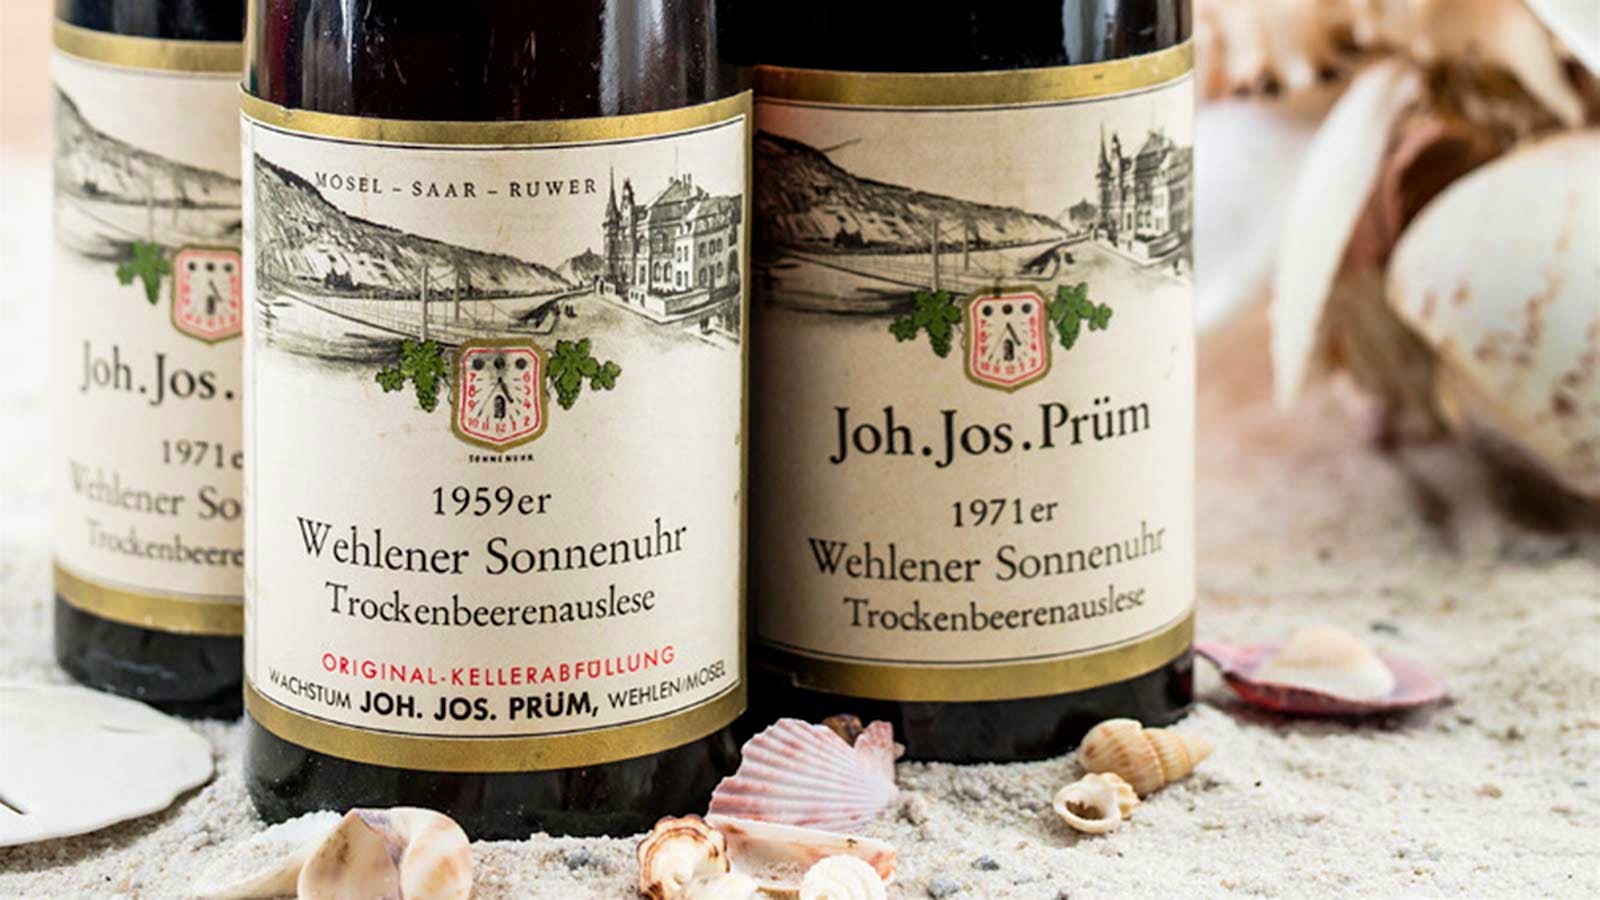 Legendary German Wine Importer's Personal Collection to Hit Auction Block